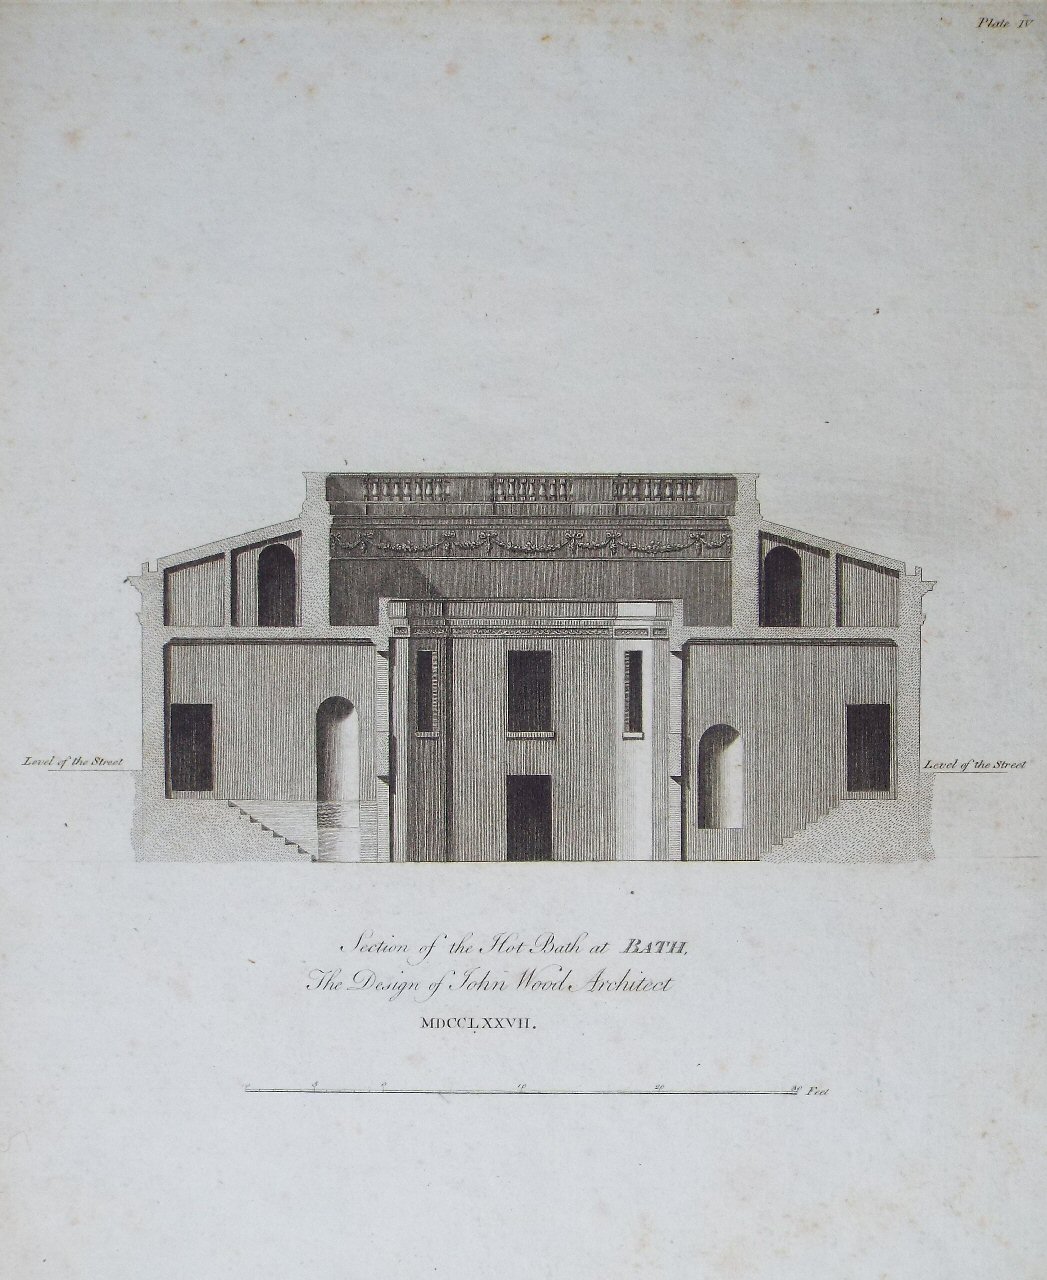 Print - Section of the Hot Bath at Bath, The Design of John Wood, Architect. MDCCLXXVII